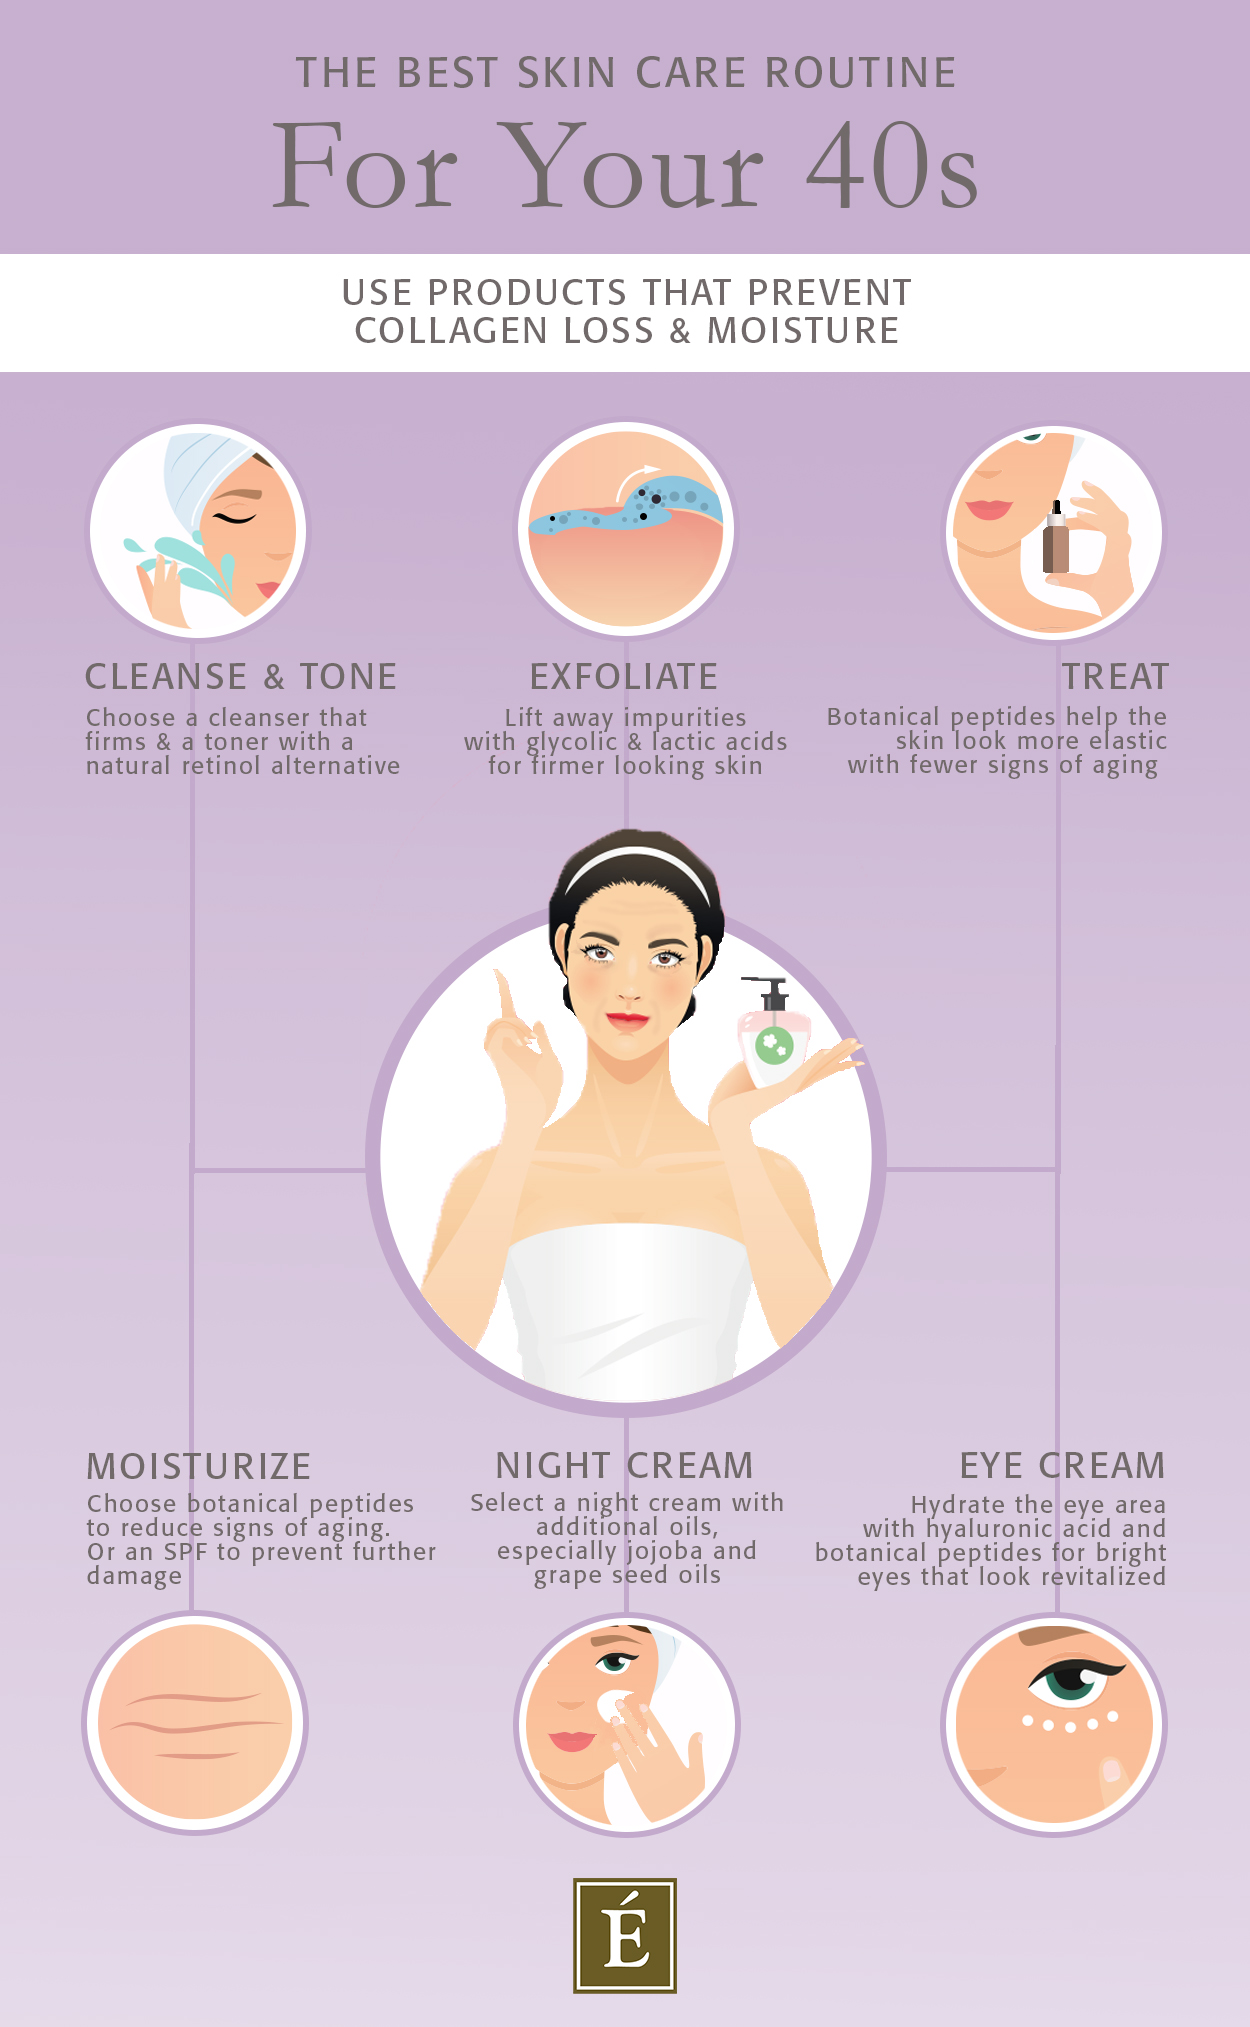 Best Skin Care Routine For Your 40s infographic